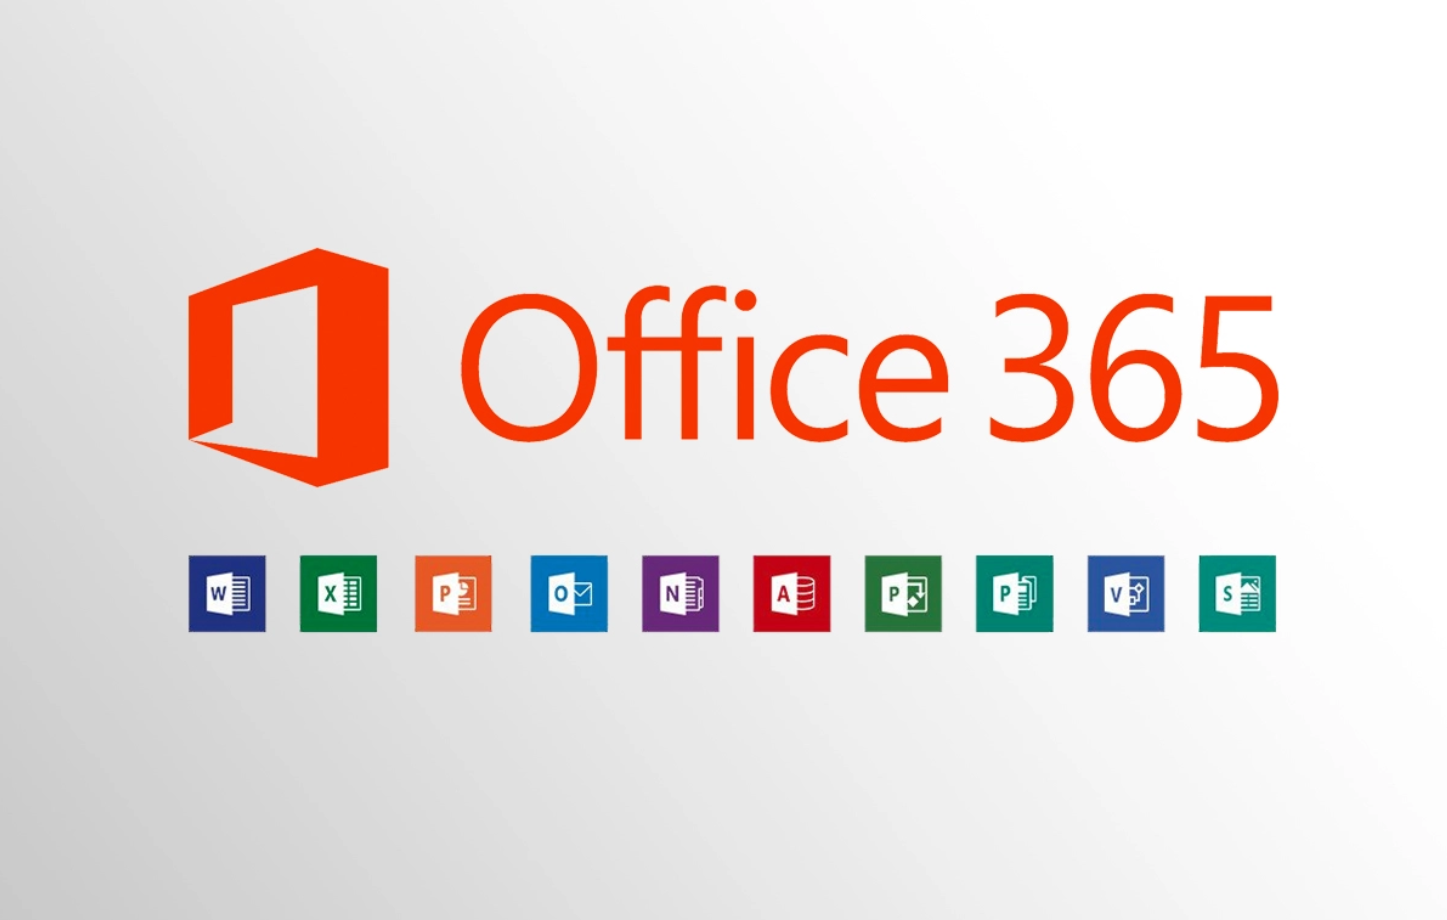 How to Get Microsoft Office 365 for Free with Keygen?